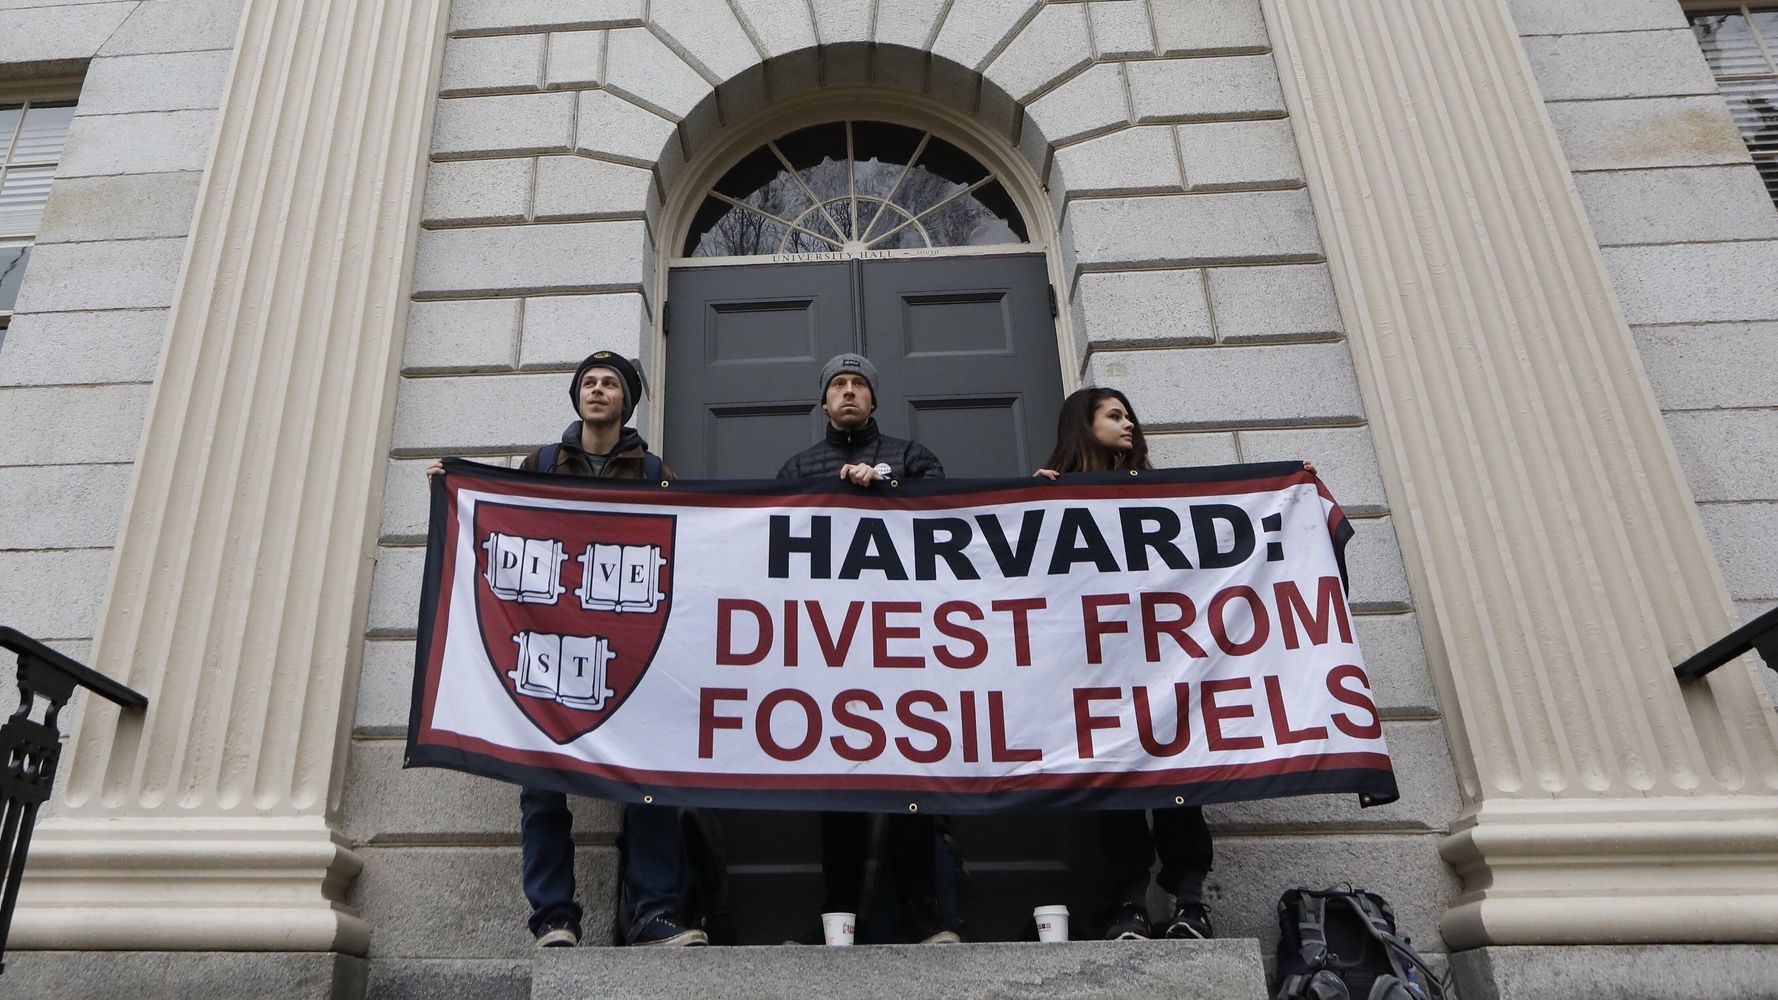 Harvard To Divest $42 Billion Endowment From Fossil Fuels After Years Of Student Protest